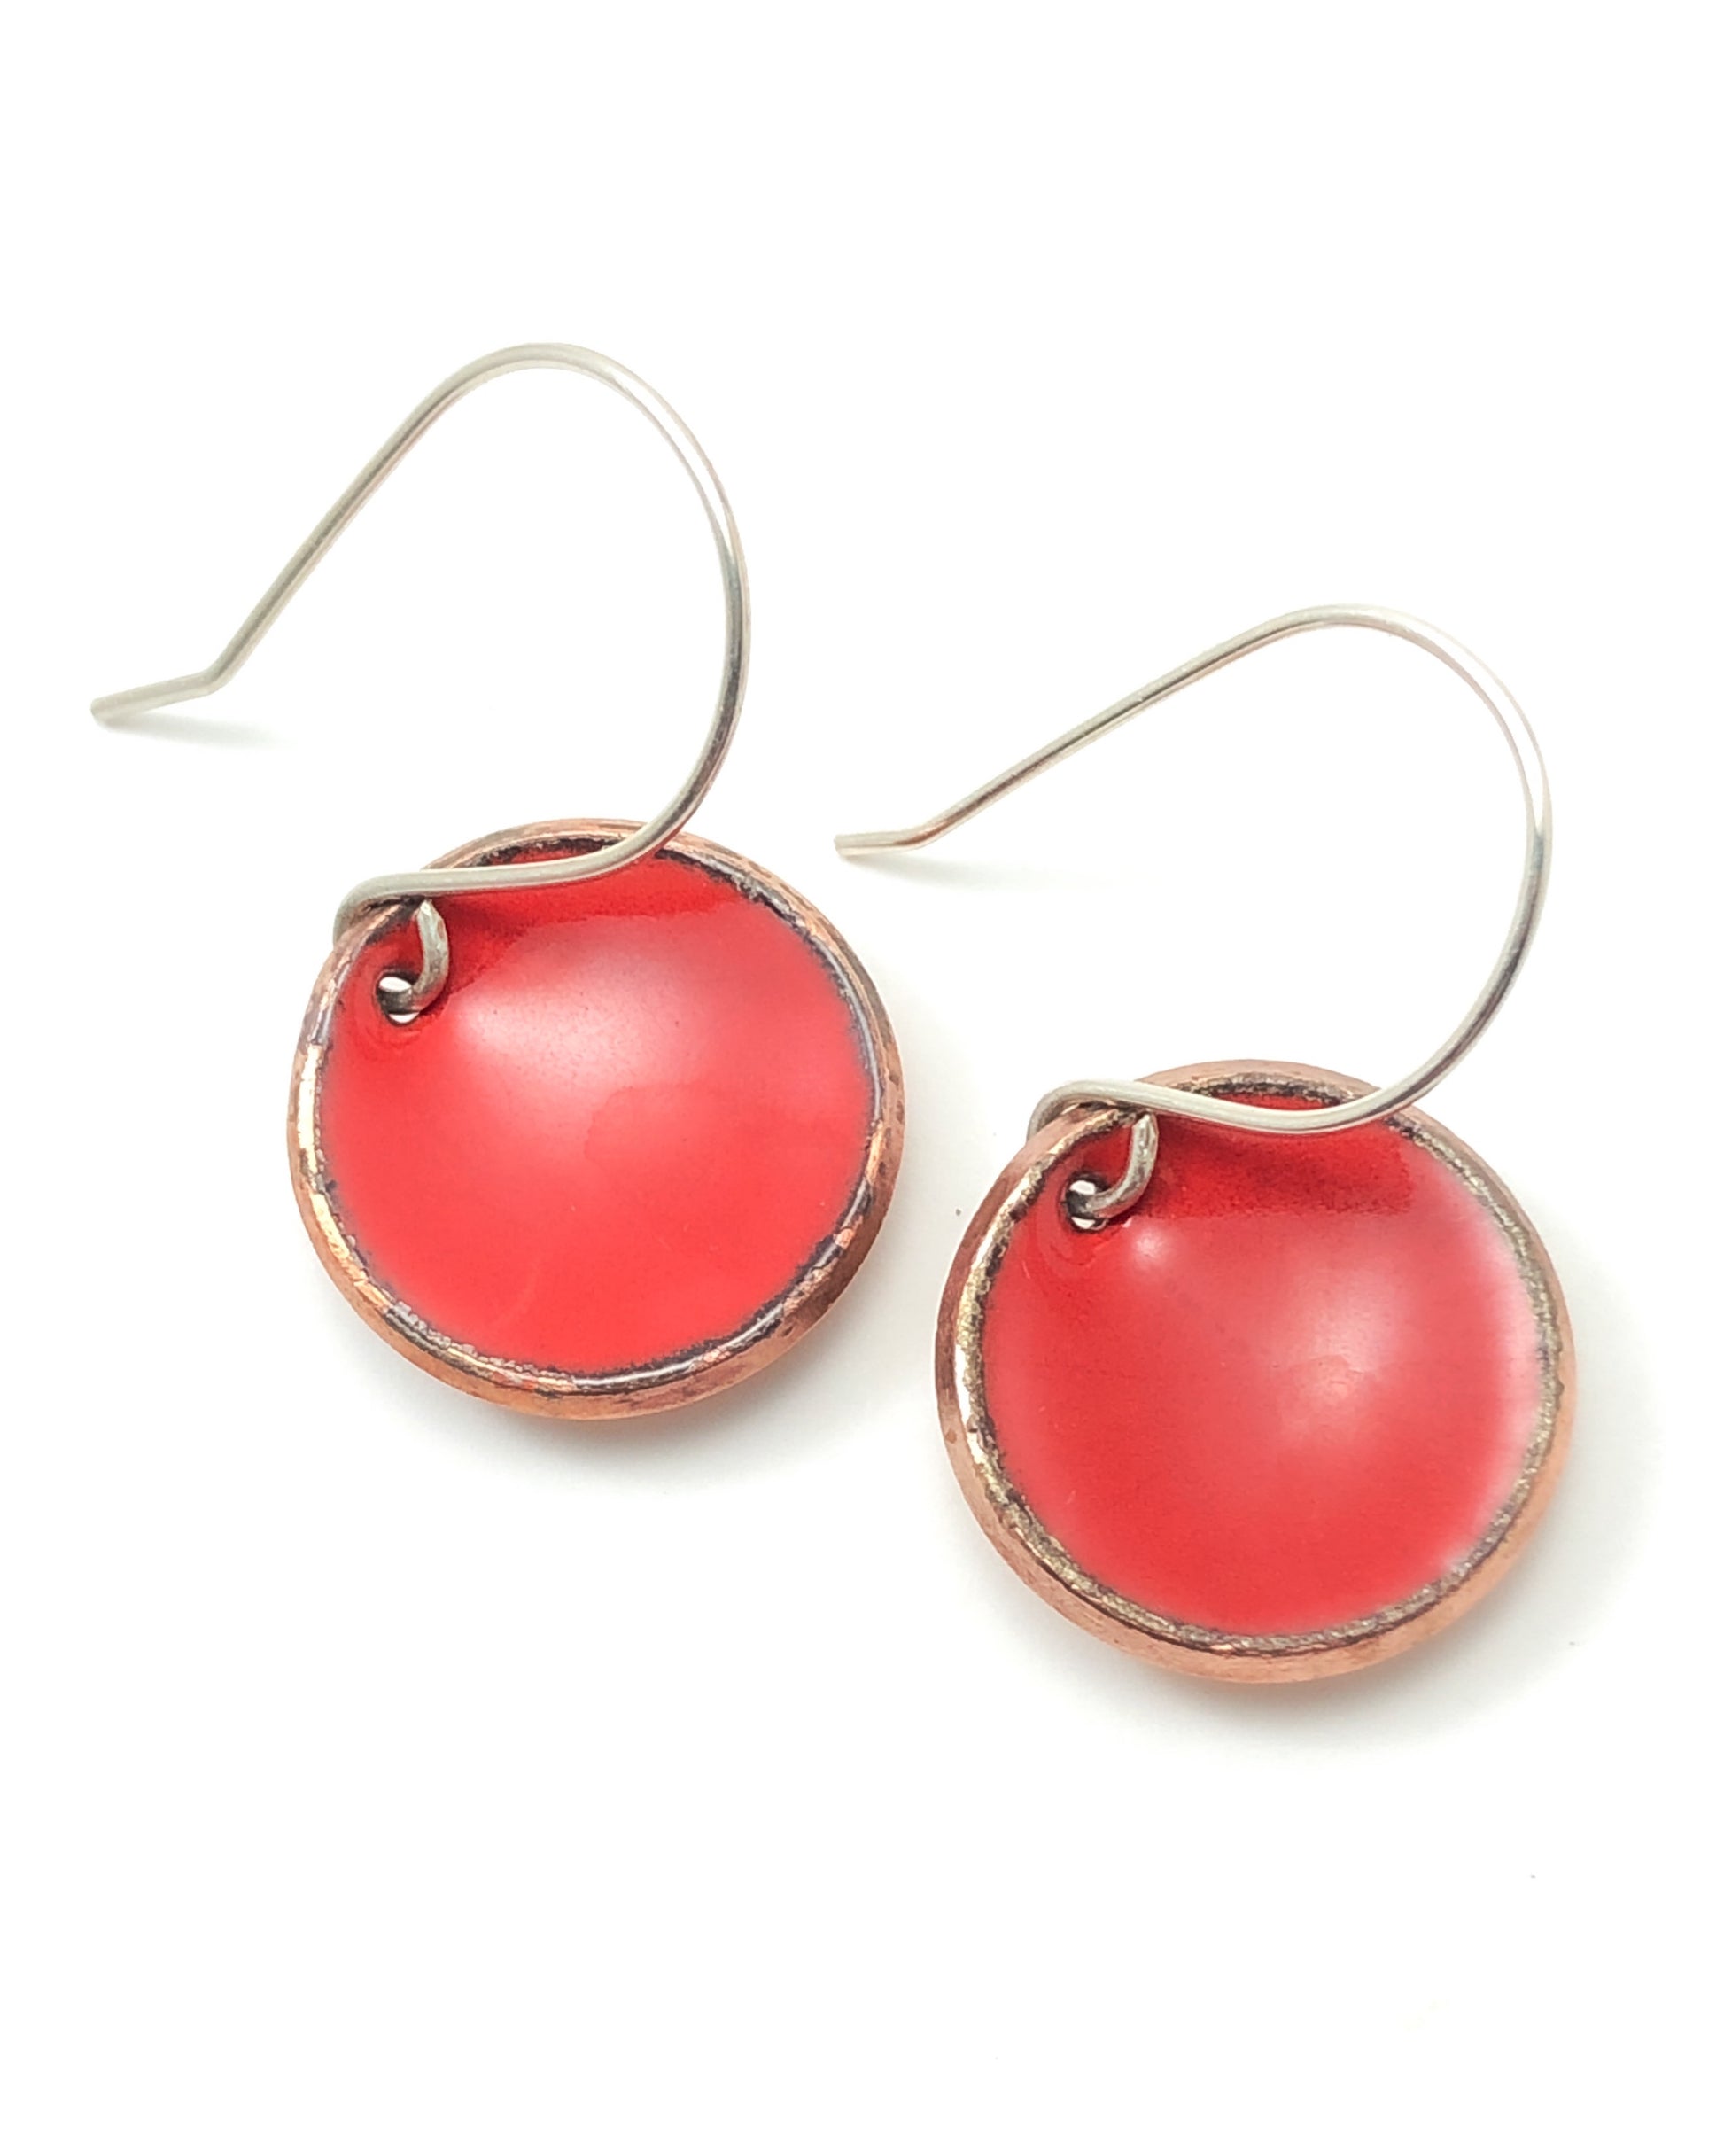 a pair of red earrings on a white background